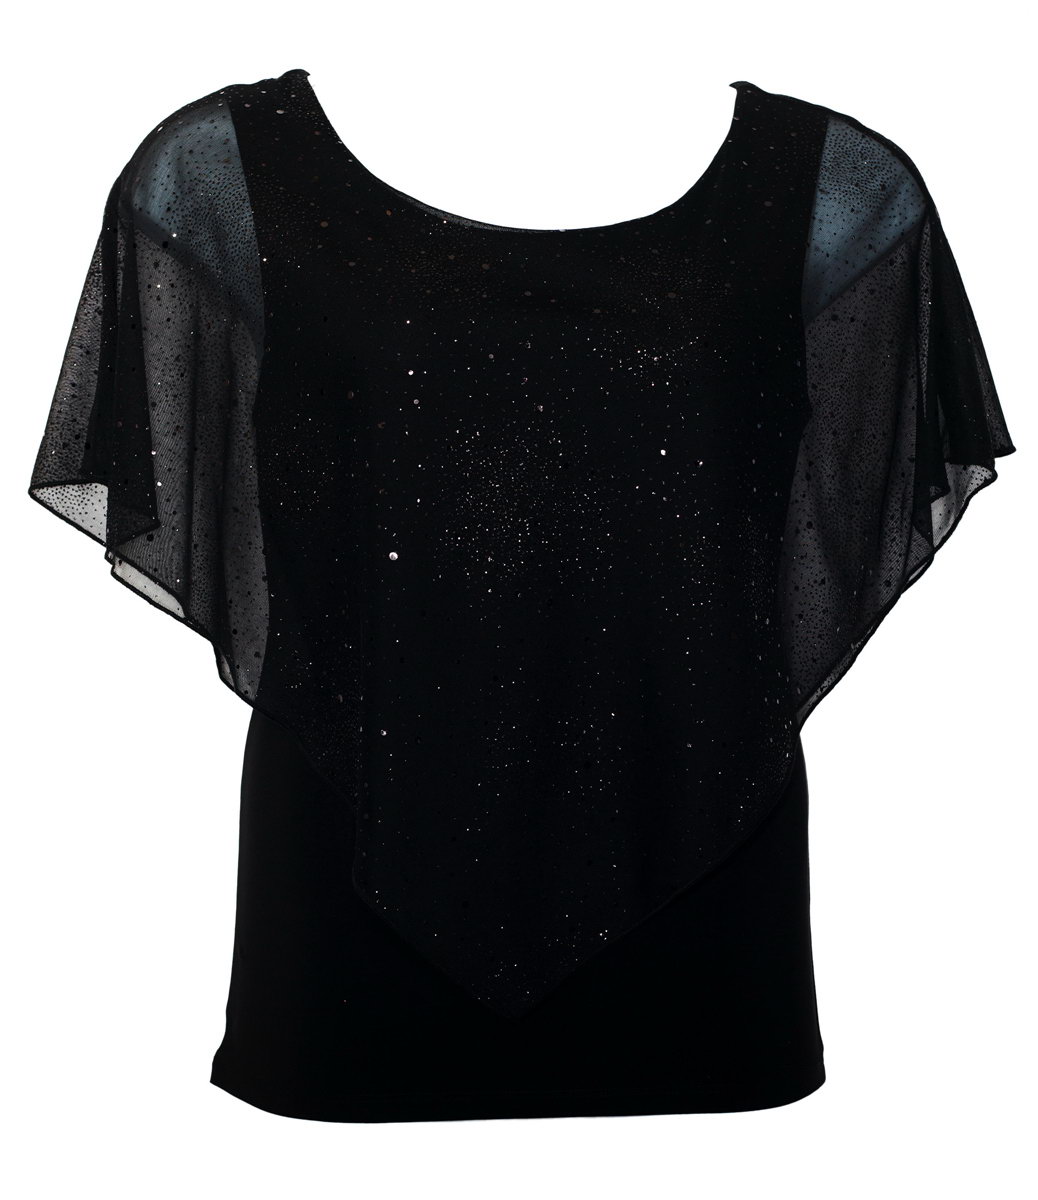 Plus Size Layered Poncho Top with Glitter Detail Black | eVogues Apparel